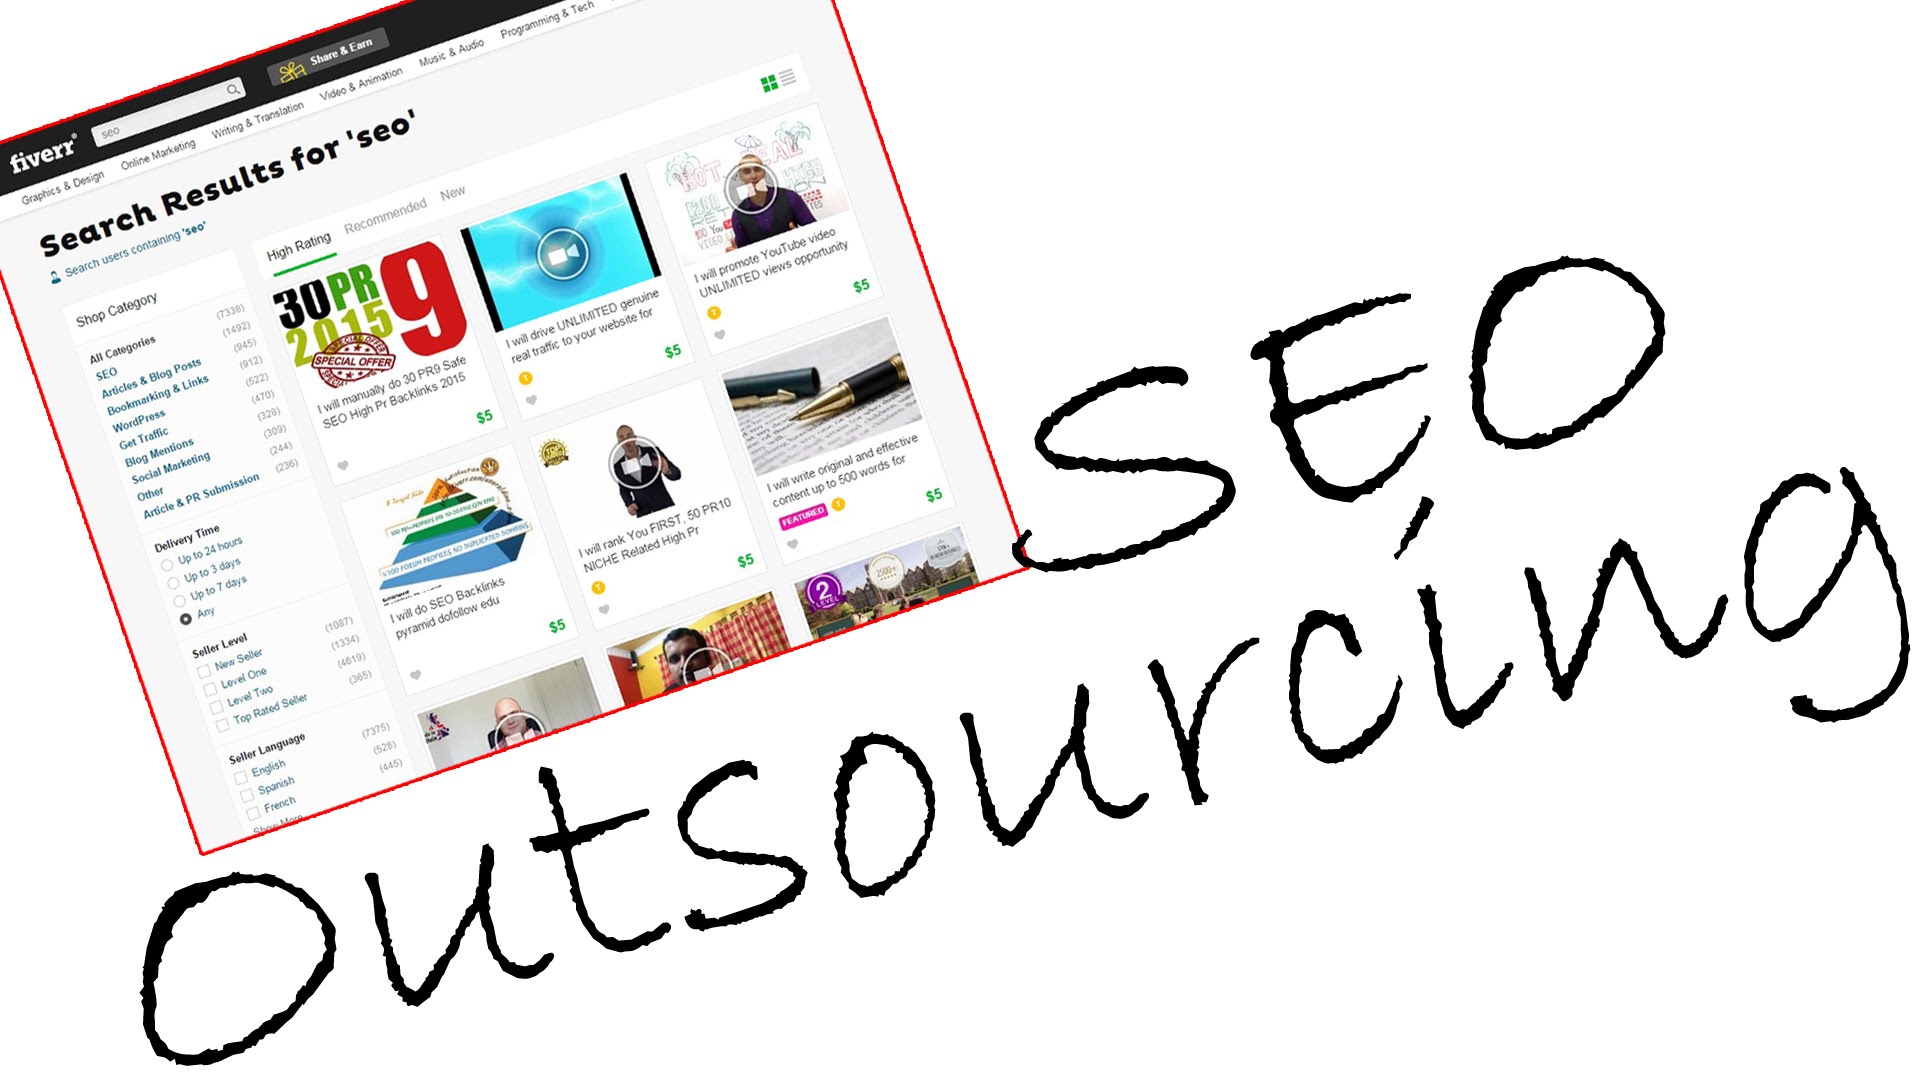 Take a Look at the Advantages of Outsourcing SEO Services